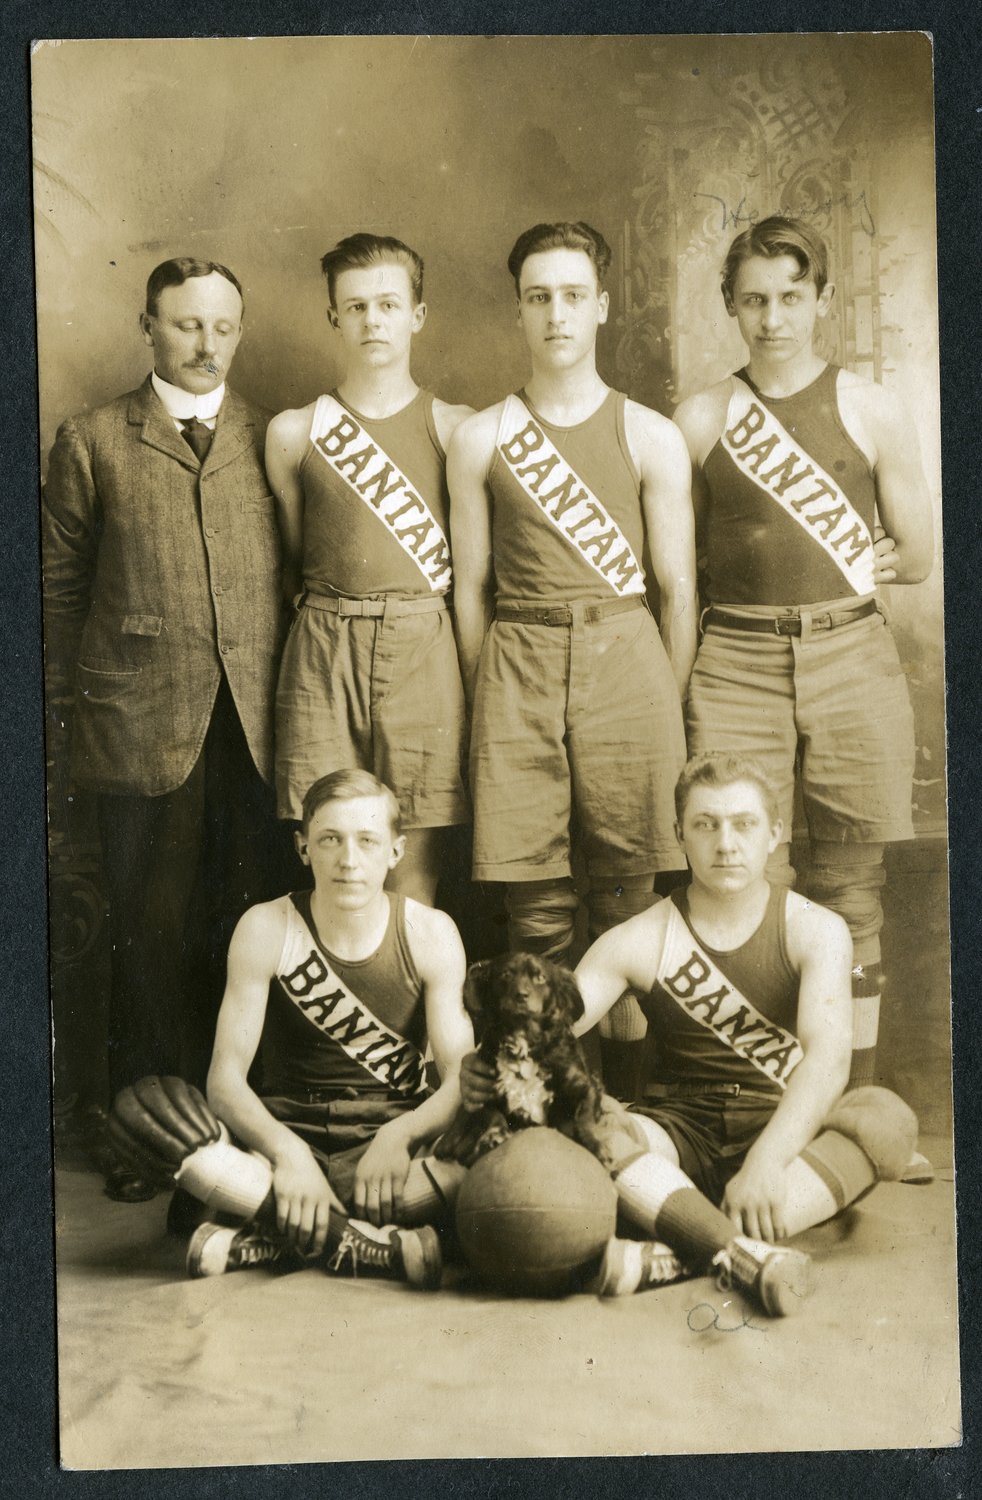 Jeff Bantams were a force:

The Jeffersonville Bantams basketball team played at the Eagle Hotel’s hall (circa 1916) against such teams as the Youngsville Eagles, Roscoe’s Criterion Five, Liberty’s Emeralds, and the Lyceum Five of Monticello. The team featured Allington and Knell, forwards, Lieb, Lixfield and Brand, guards, and Bollenbach, center.  Henry “Heiner” Bollenbach is standing, extreme right. Alan Lieb is seated, lower right. It is likely that when the Eagle Hotel was destroyed in the Jeffersonville fire of 1918, the team lost its hall; little information could be found about the team after that. If you know the names of the others pictured above, please email obits@sc-democrat.com or call (845) 887-5200.